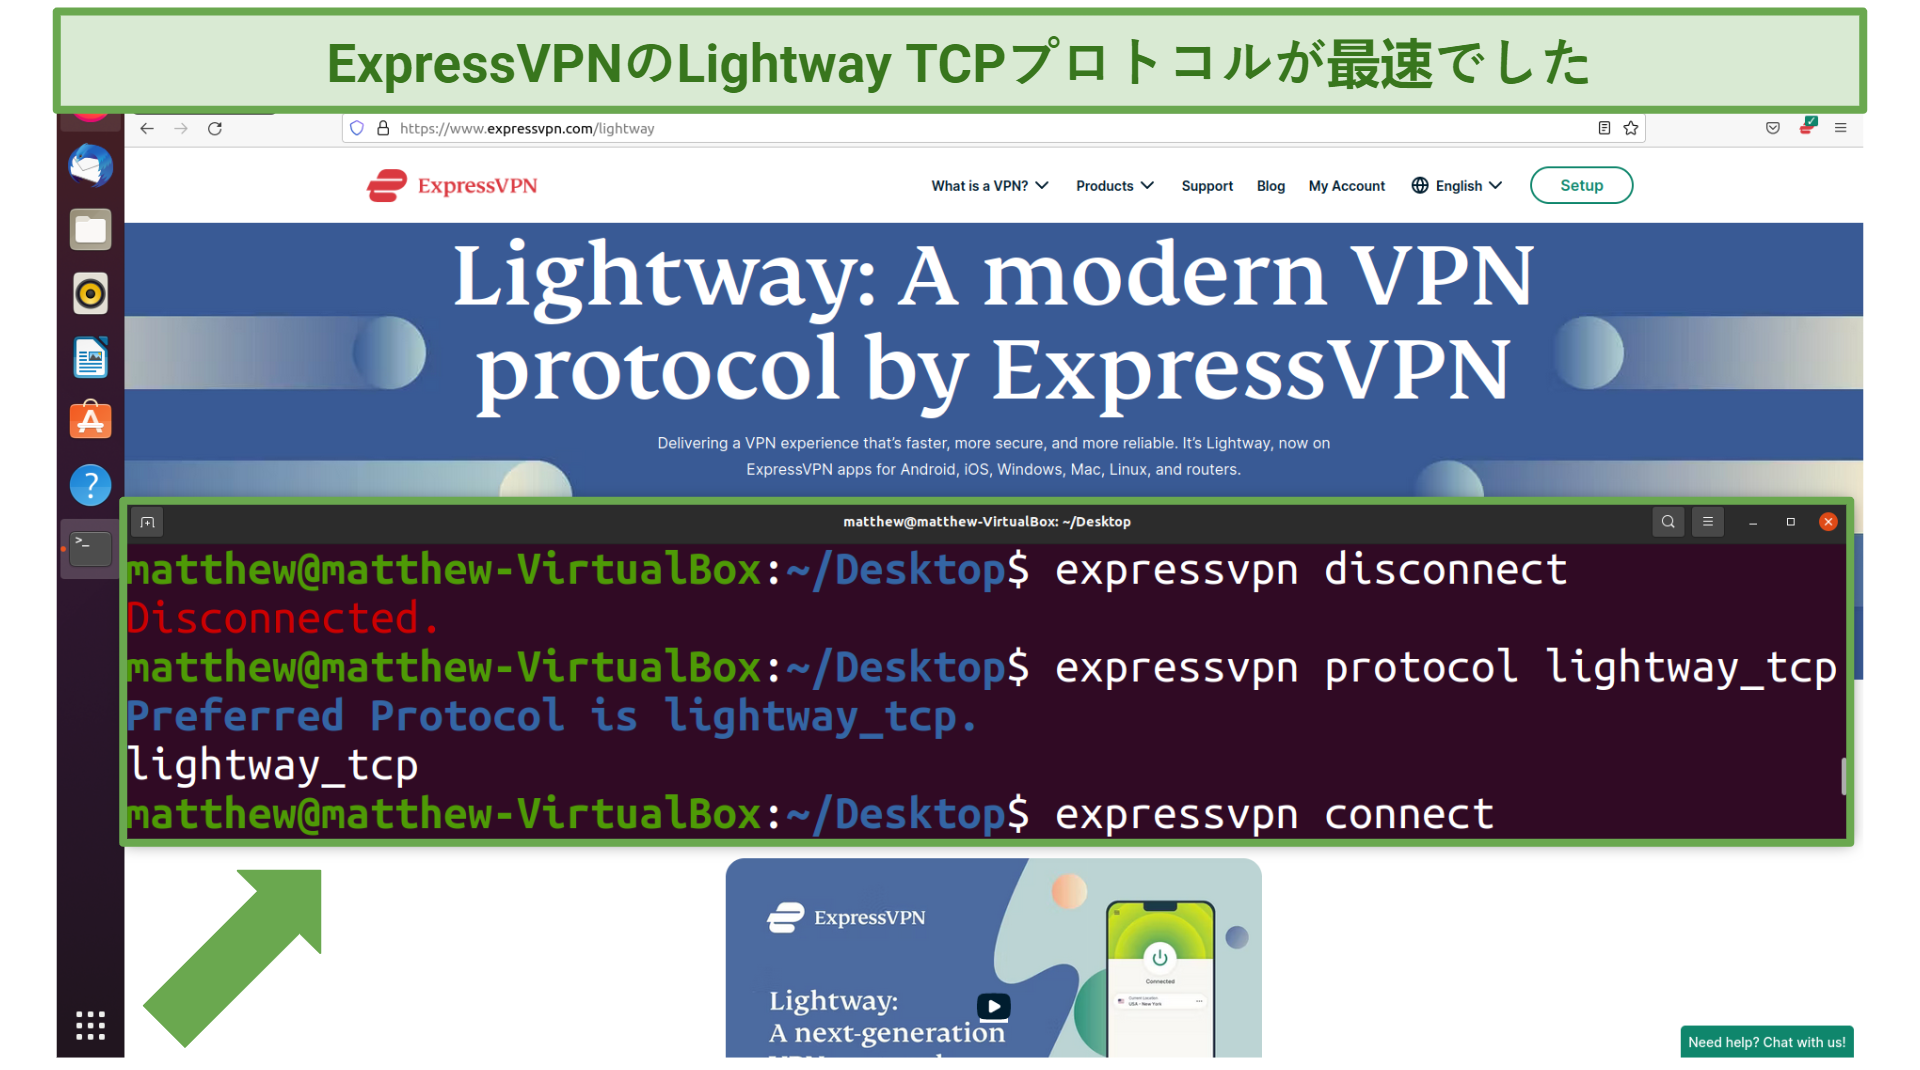 Screenshot of ExpressVPN's command line on Linux switching to the Lightway TCP protocol